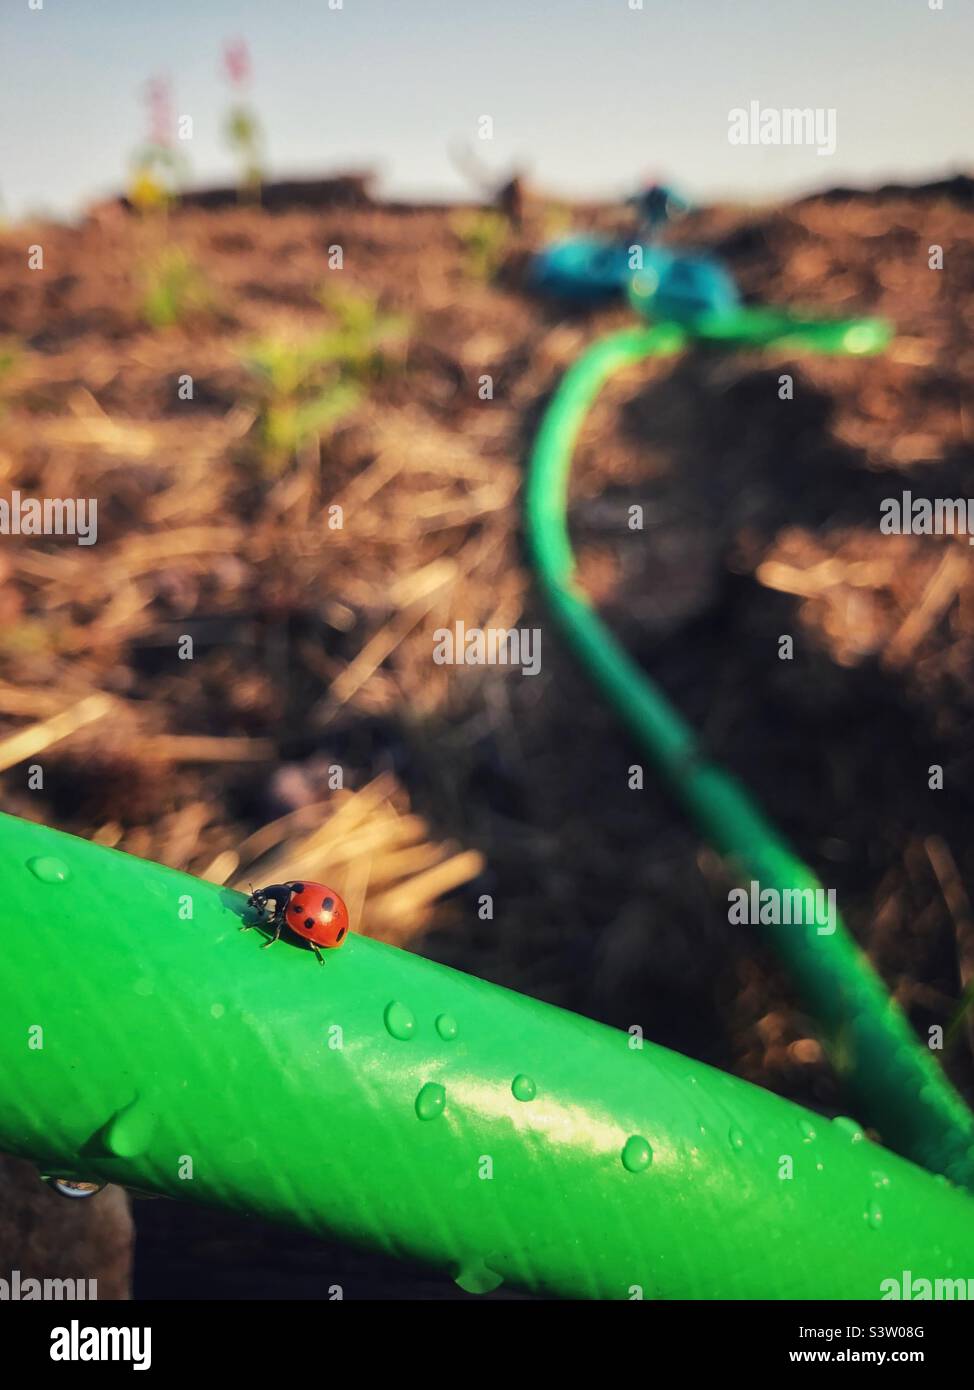 Red ladybug on a green hose Stock Photo